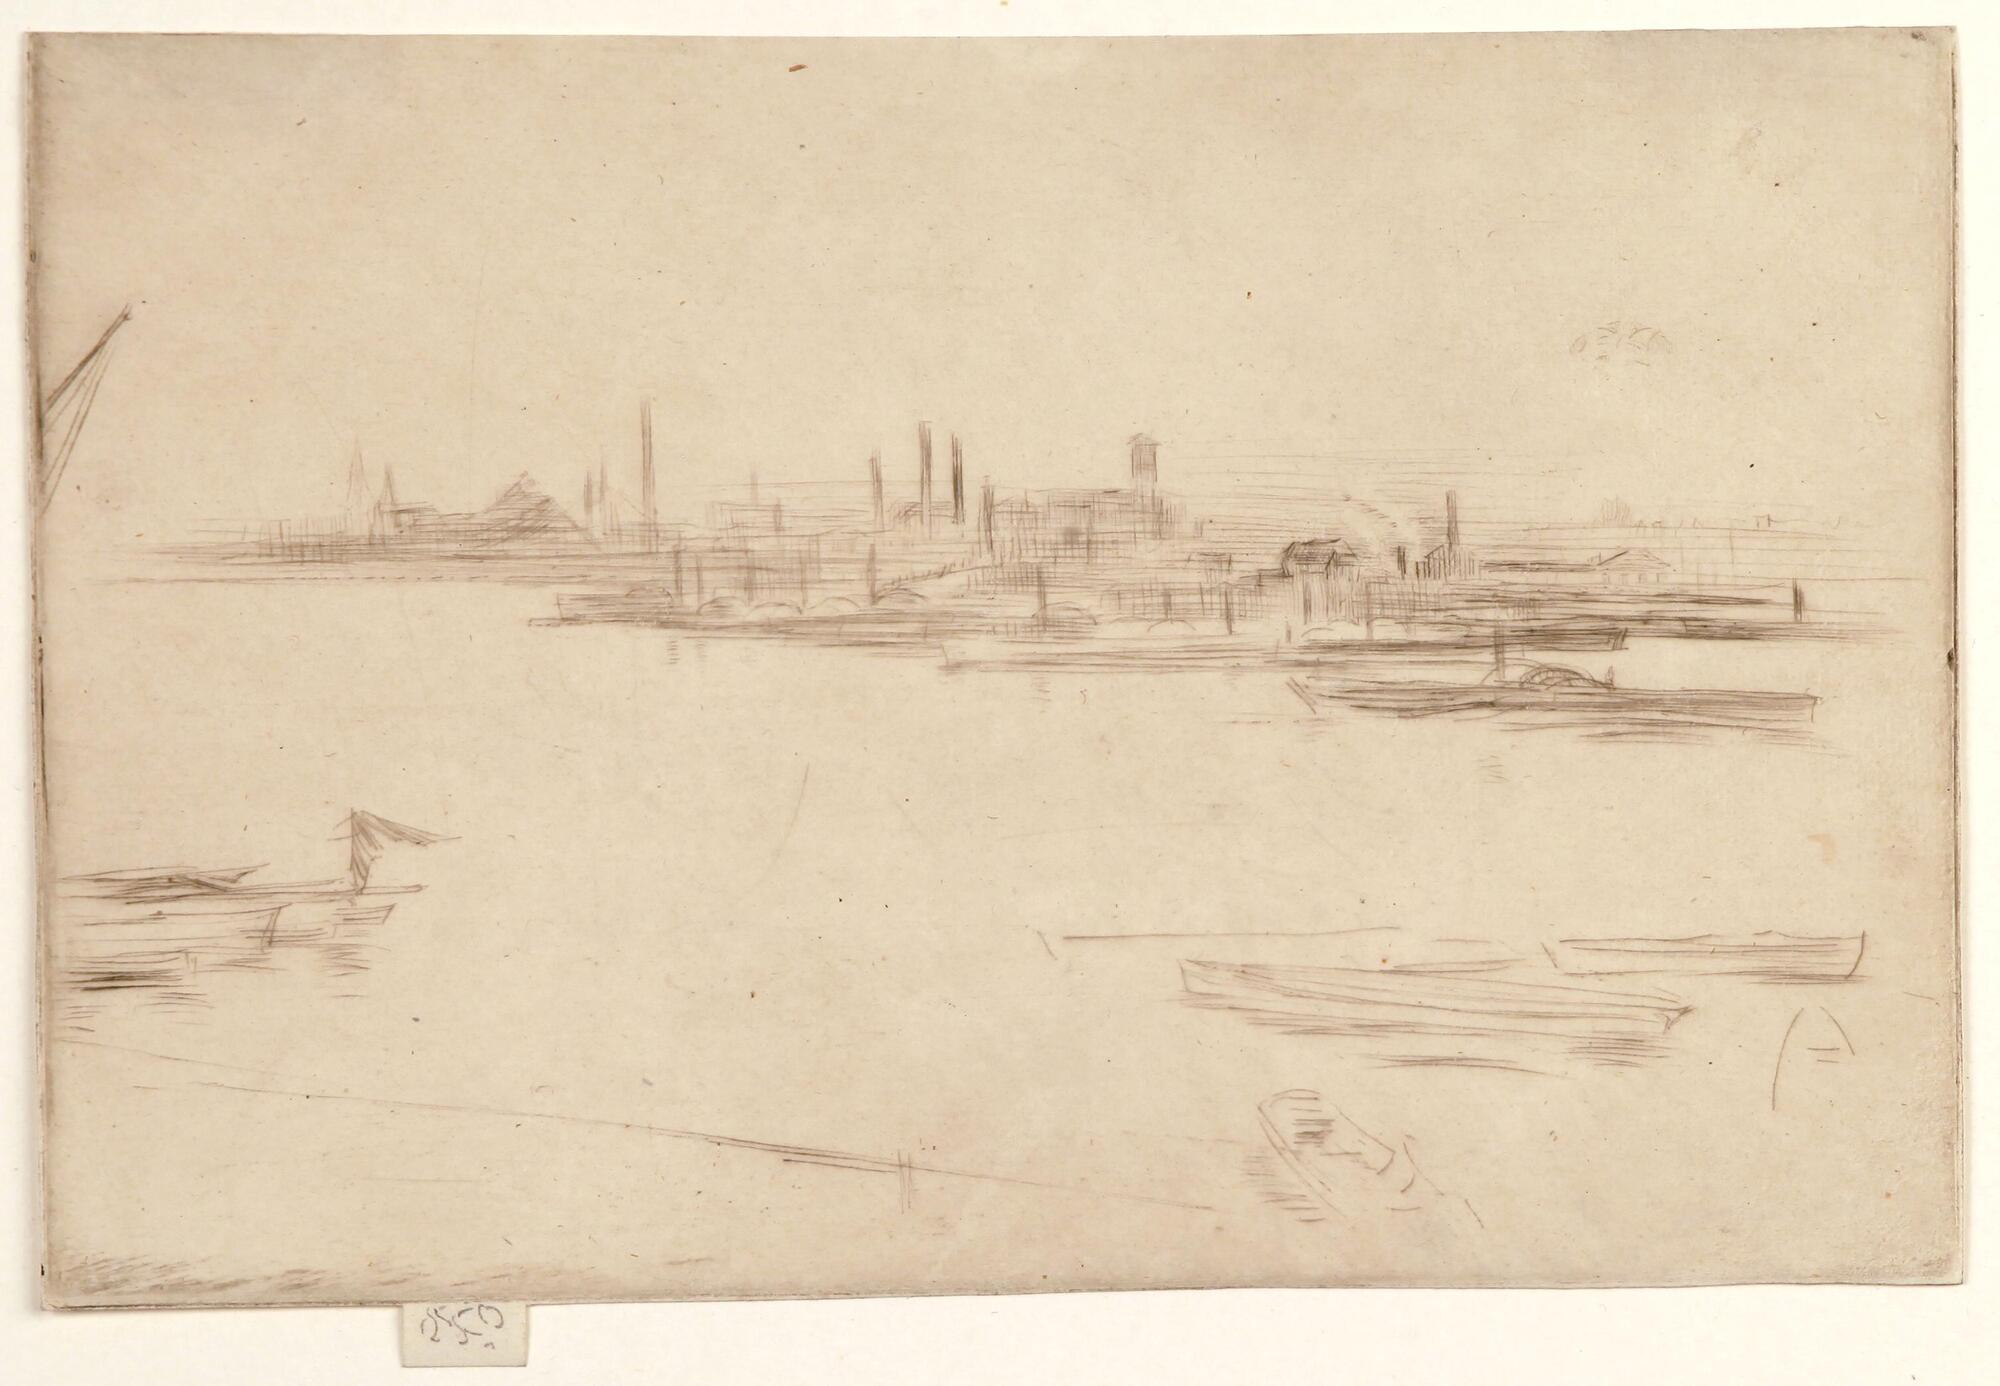 A stretch of water in the foreground and middle ground leads to a horizontal distant shore that is composed of a series of horizontal stepped recessions. The buildings on the far shore appear to be industrial buildings, with many smokestacks. At the bottom of the image are some lightly drawn boats.